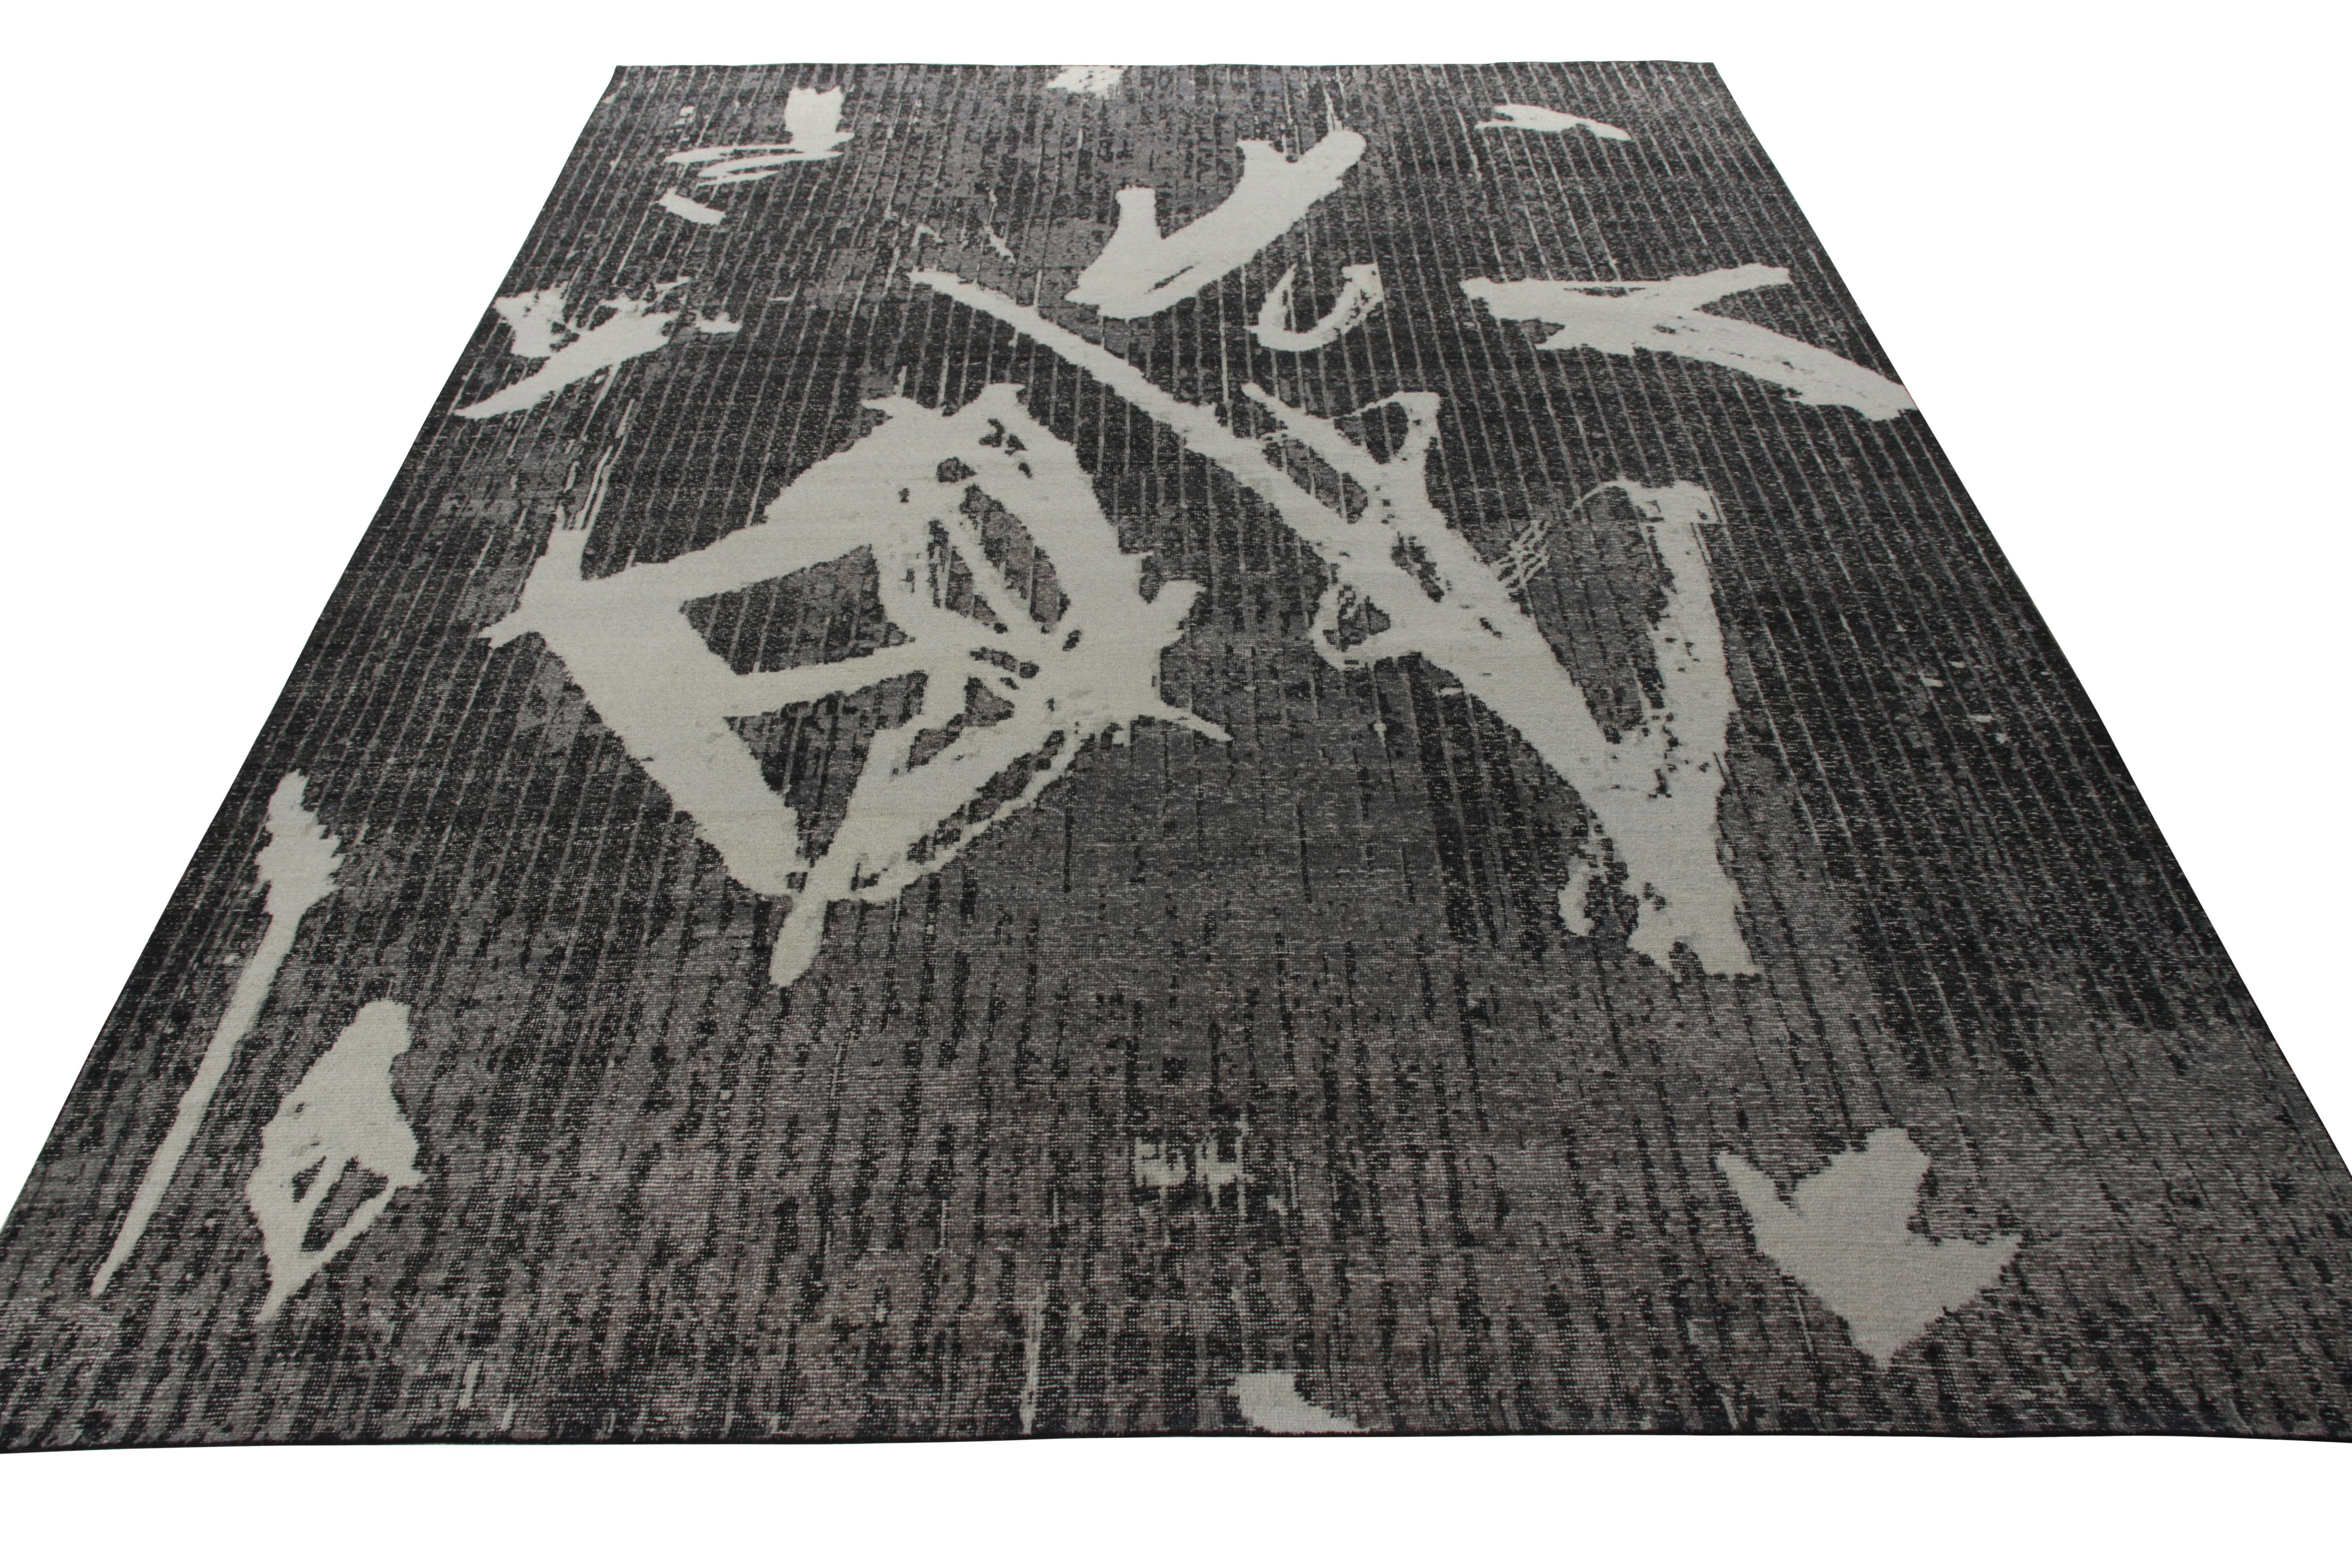 A hand-knotted 10x14 rug enjoying the amalgamation of a modern geometric pattern and distressed style, belonging to Rug & Kilim’s Homage Collection. The rug carries a shabby chic demeanor in light-dark shades of gray with black perfectly